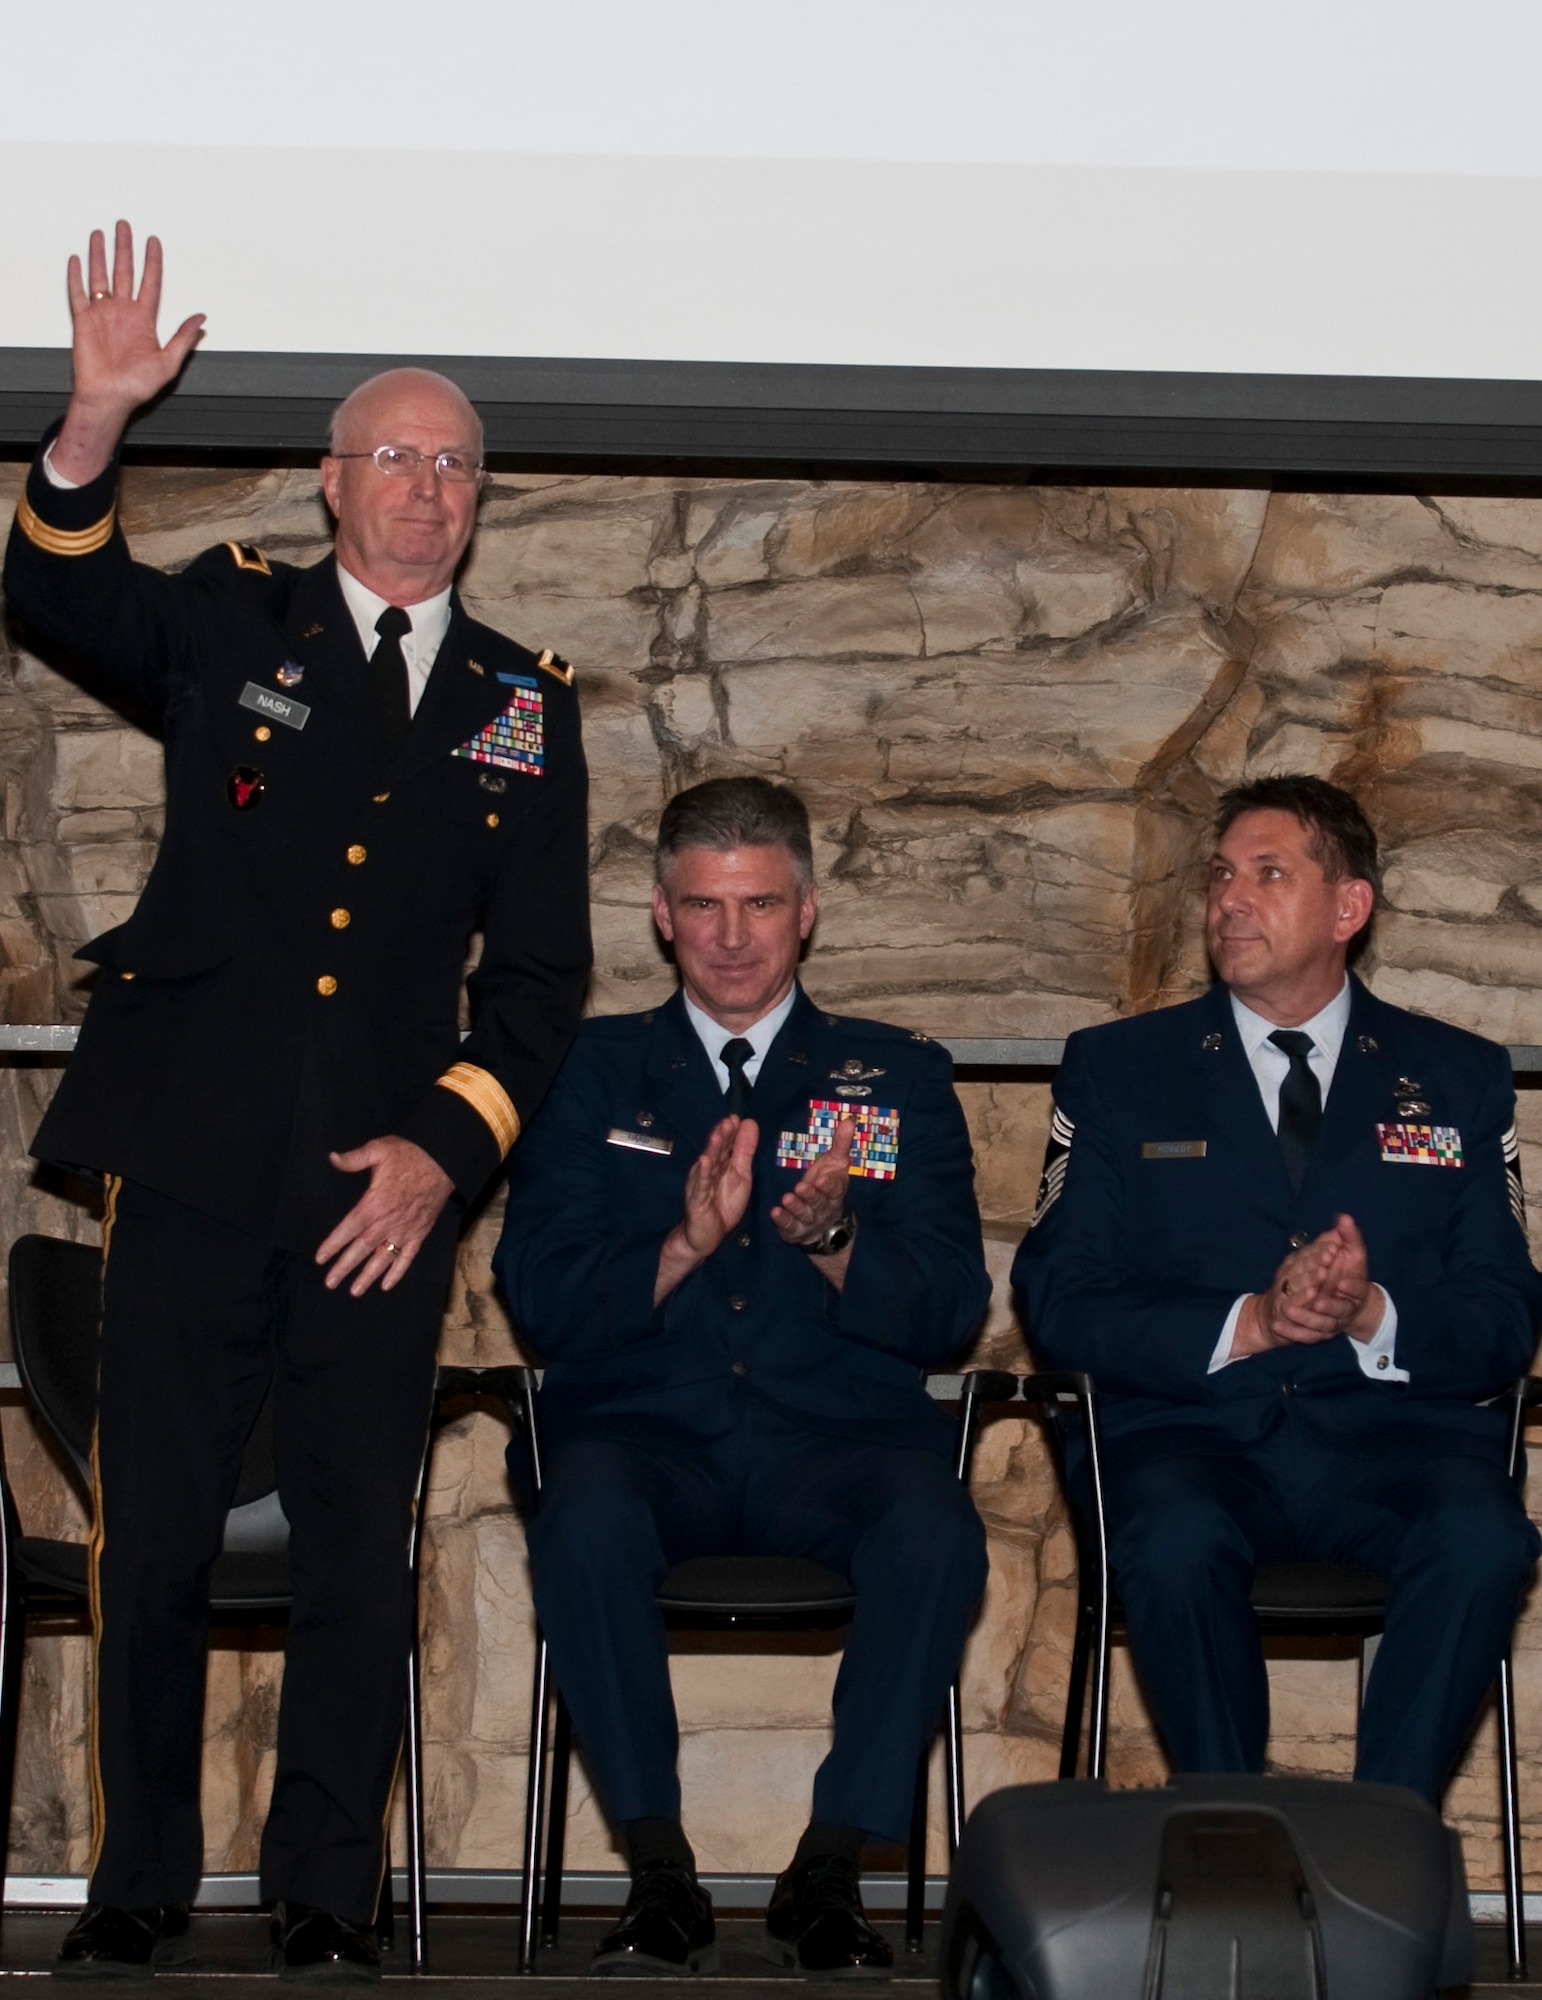 The Adjutant General of Minnesota, Maj. Gen. Rick Nash, waves from the stage during the 133rd Airlift Wing Recognition Ceremony Dec. 11, 2010 in St. Paul, Minn. Sitting alongside him are 133rd Airlift Wing Commander Col. Greg Haase and 133rd Airlift Wing Acting Command Chief, Chief Master Sgt. Ray Kennedy.
USAF official photo by Tech. Sgt. Erik Gudmundson